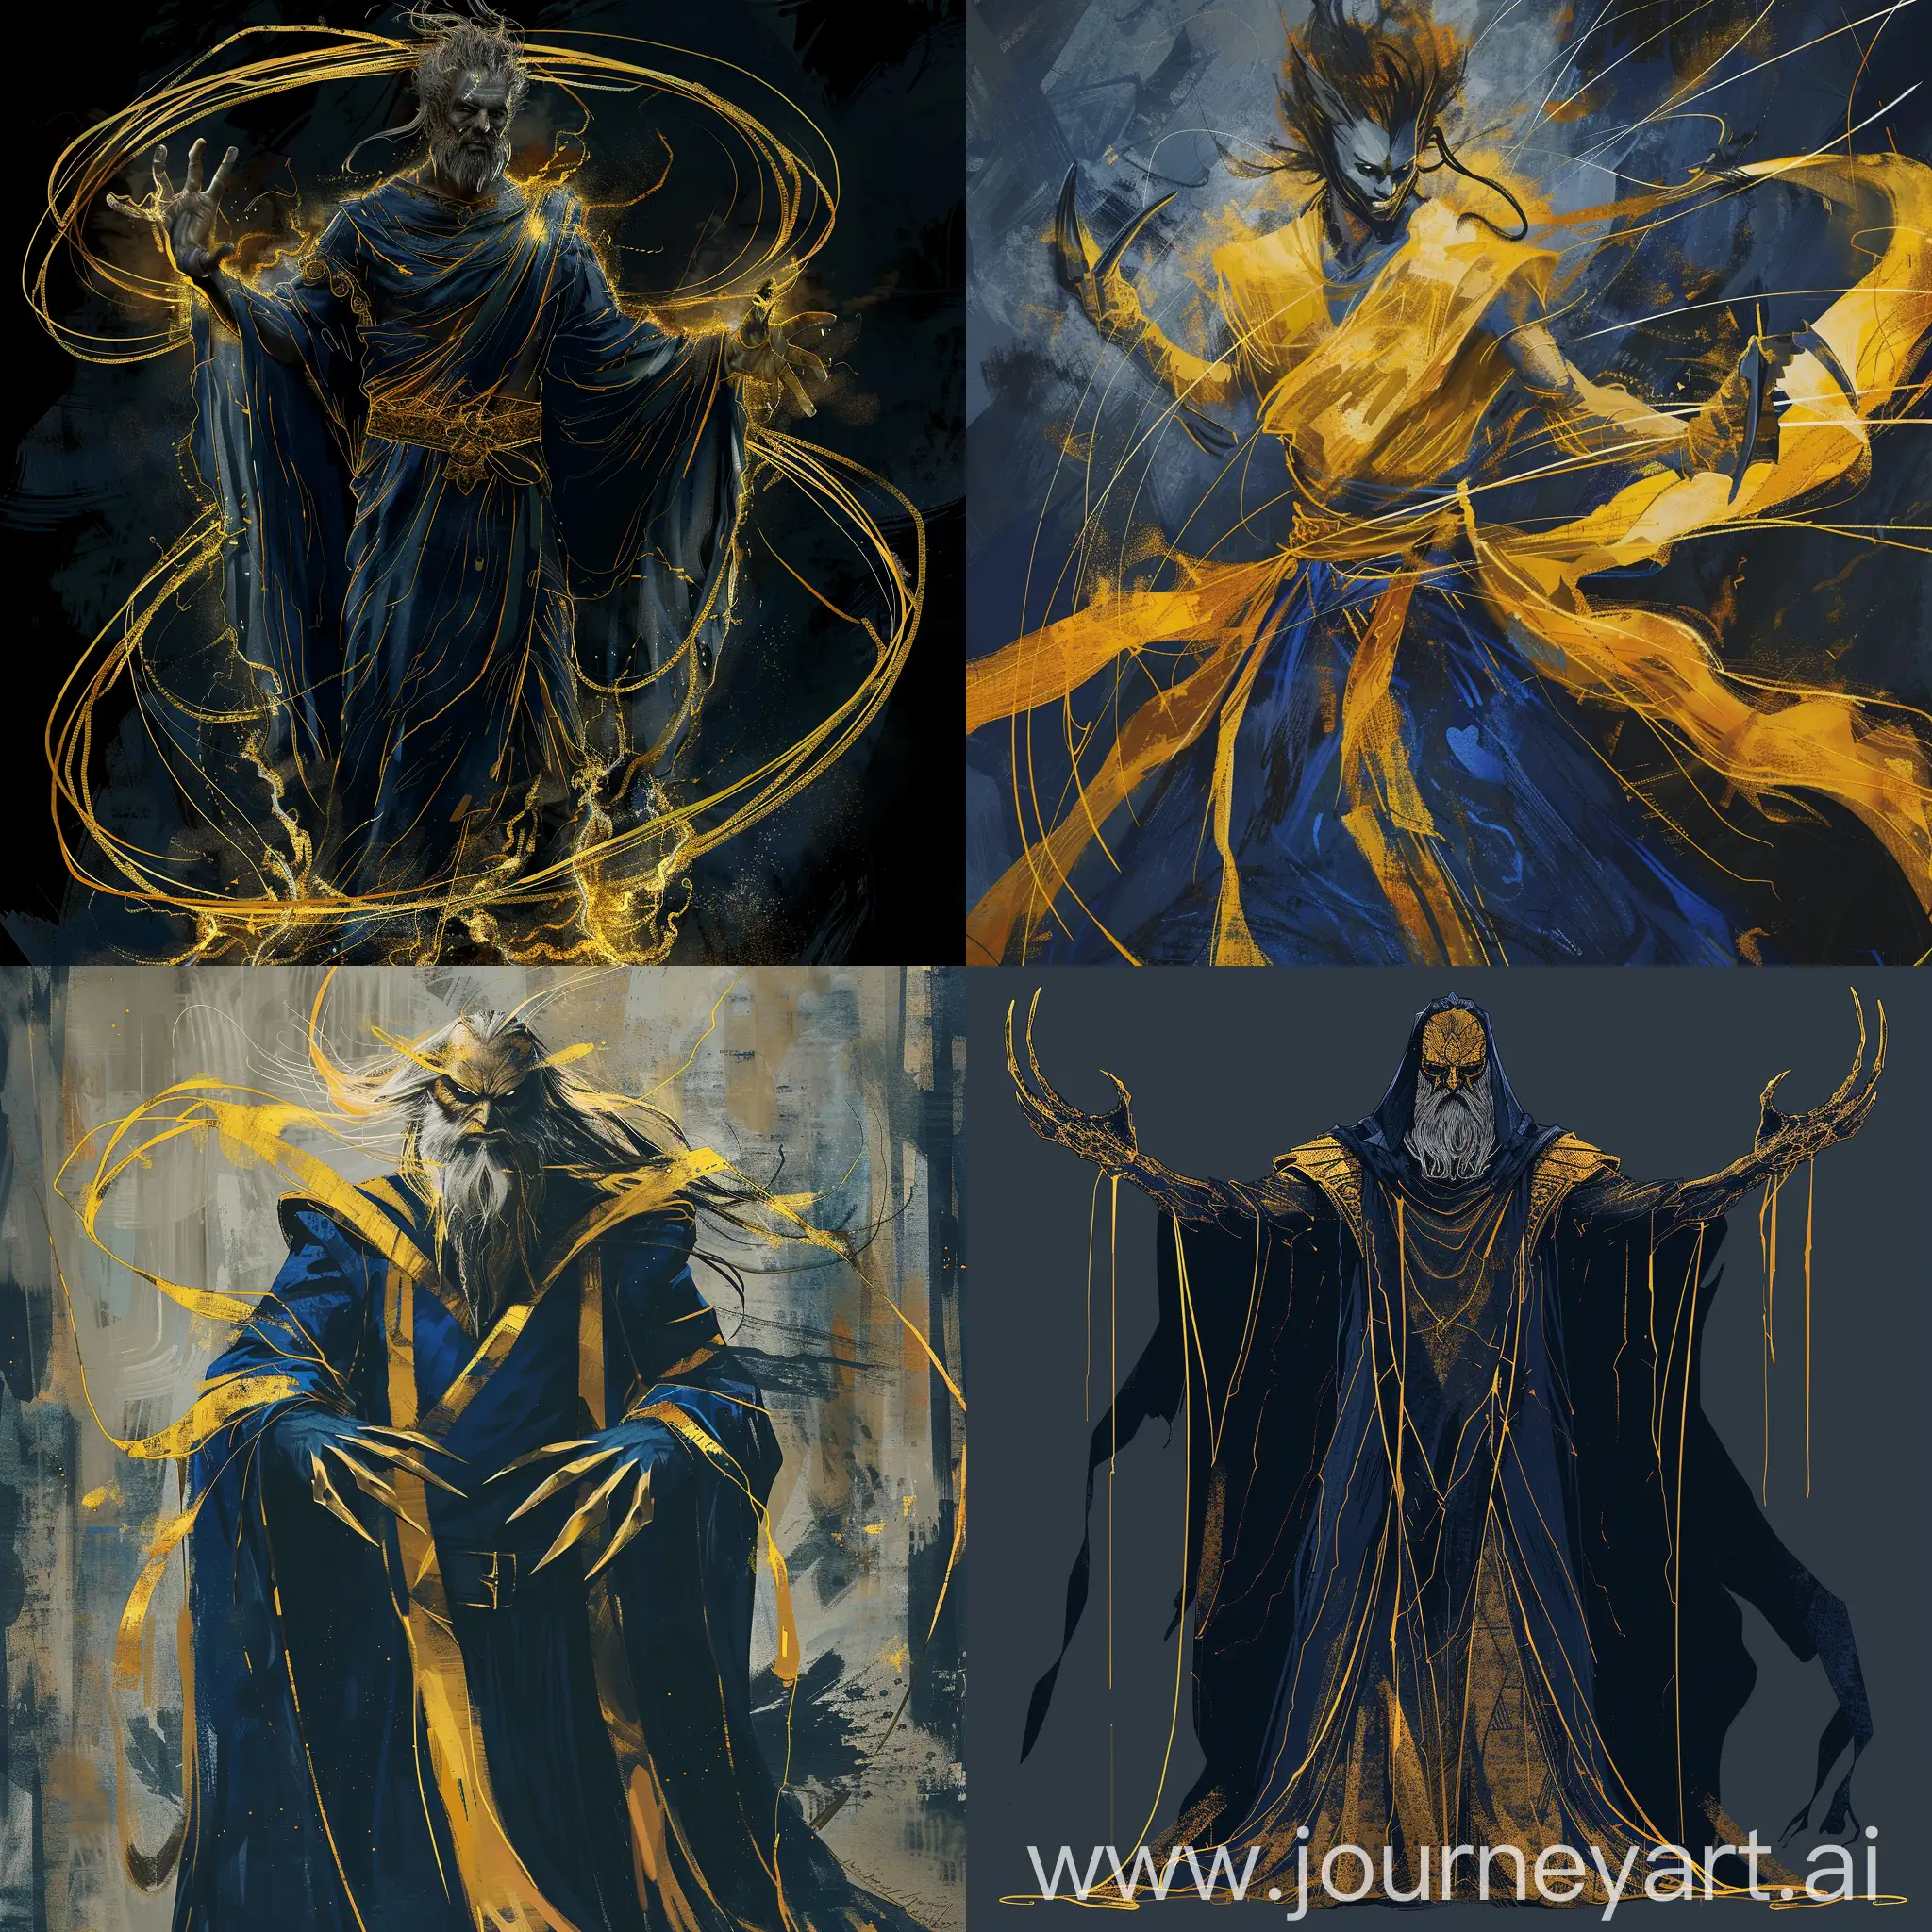 Hades-God-of-the-Underworld-with-Wolverine-Claws-in-Epic-Night-Blue-Dress